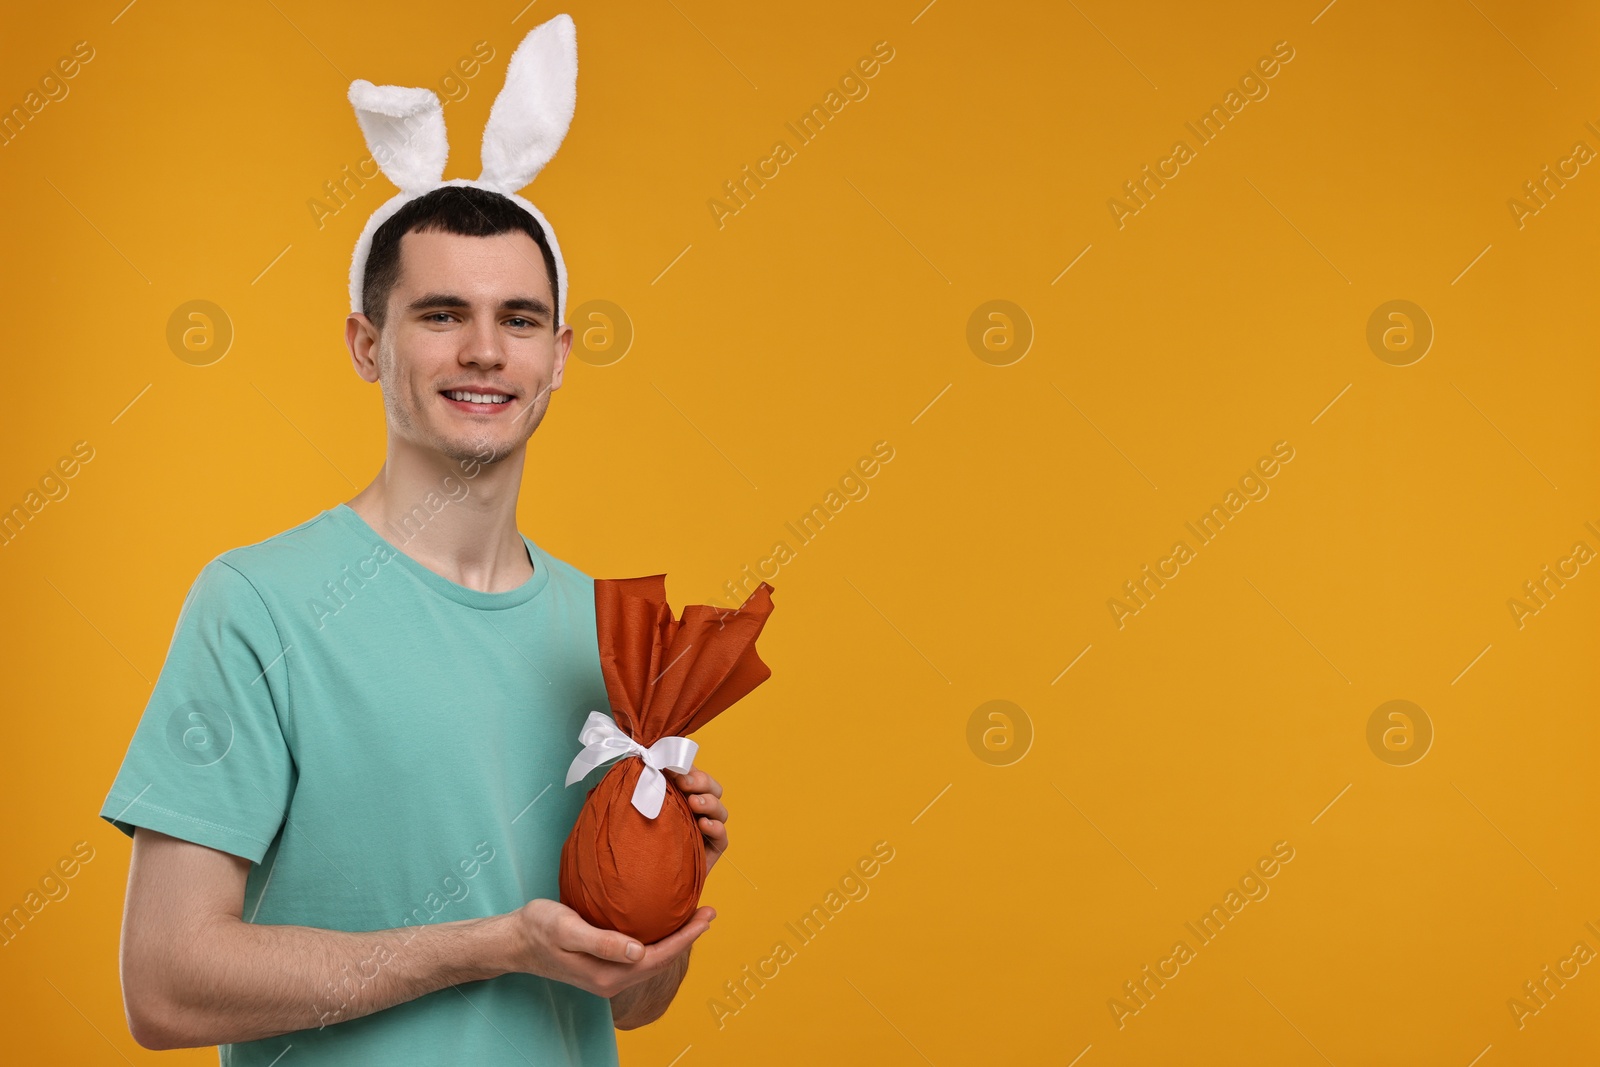 Photo of Easter celebration. Handsome young man with bunny ears holding wrapped gift on orange background. Space for text